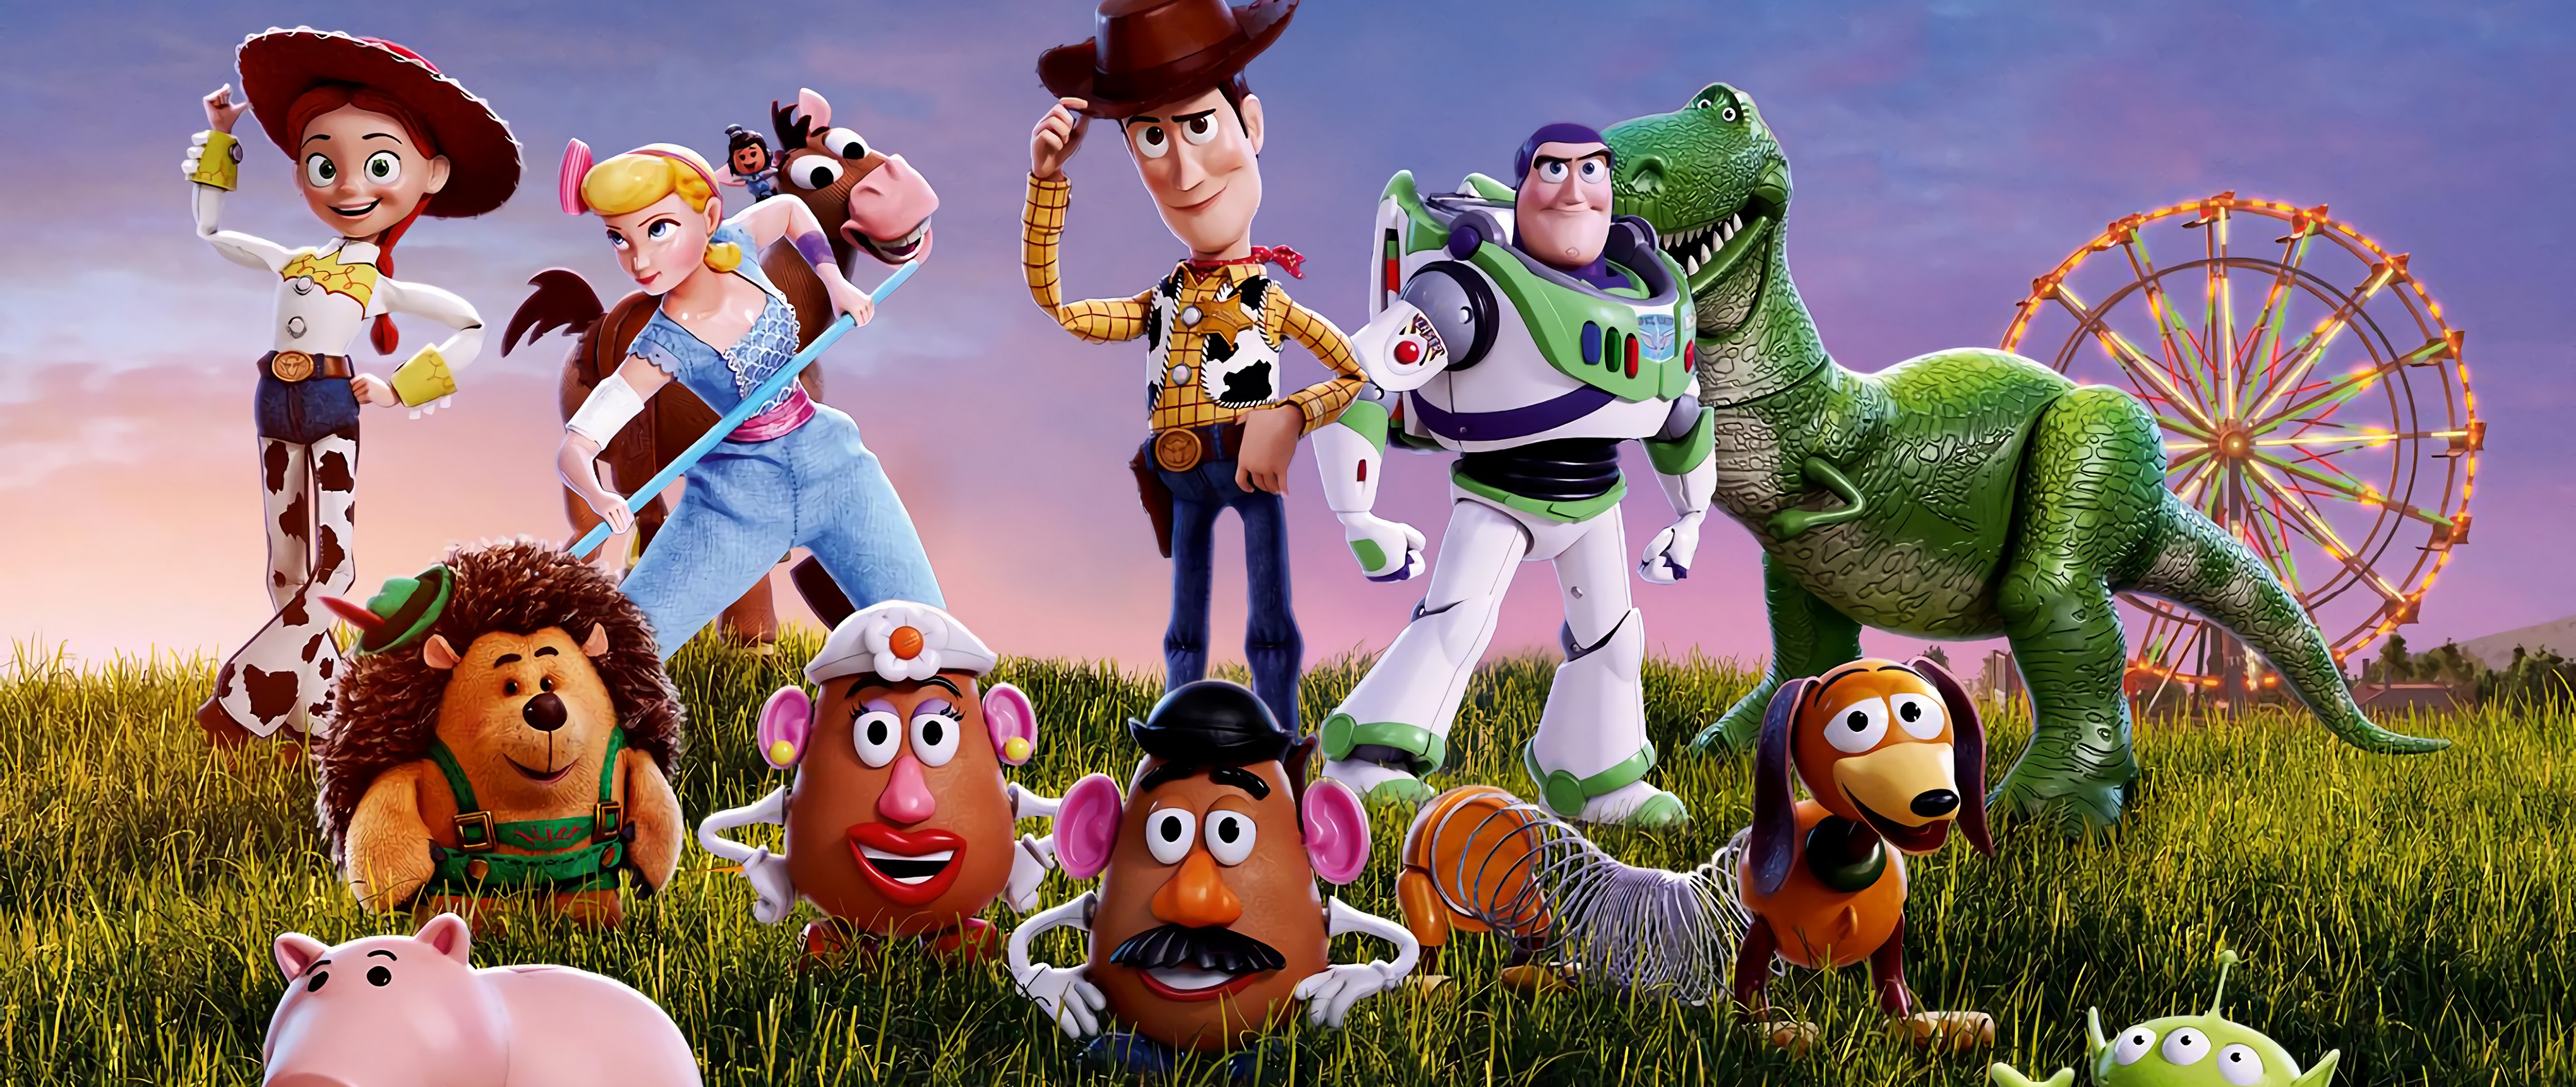 333074 Toy Story 4, Characters HD - Rare Gallery HD Wallpapers